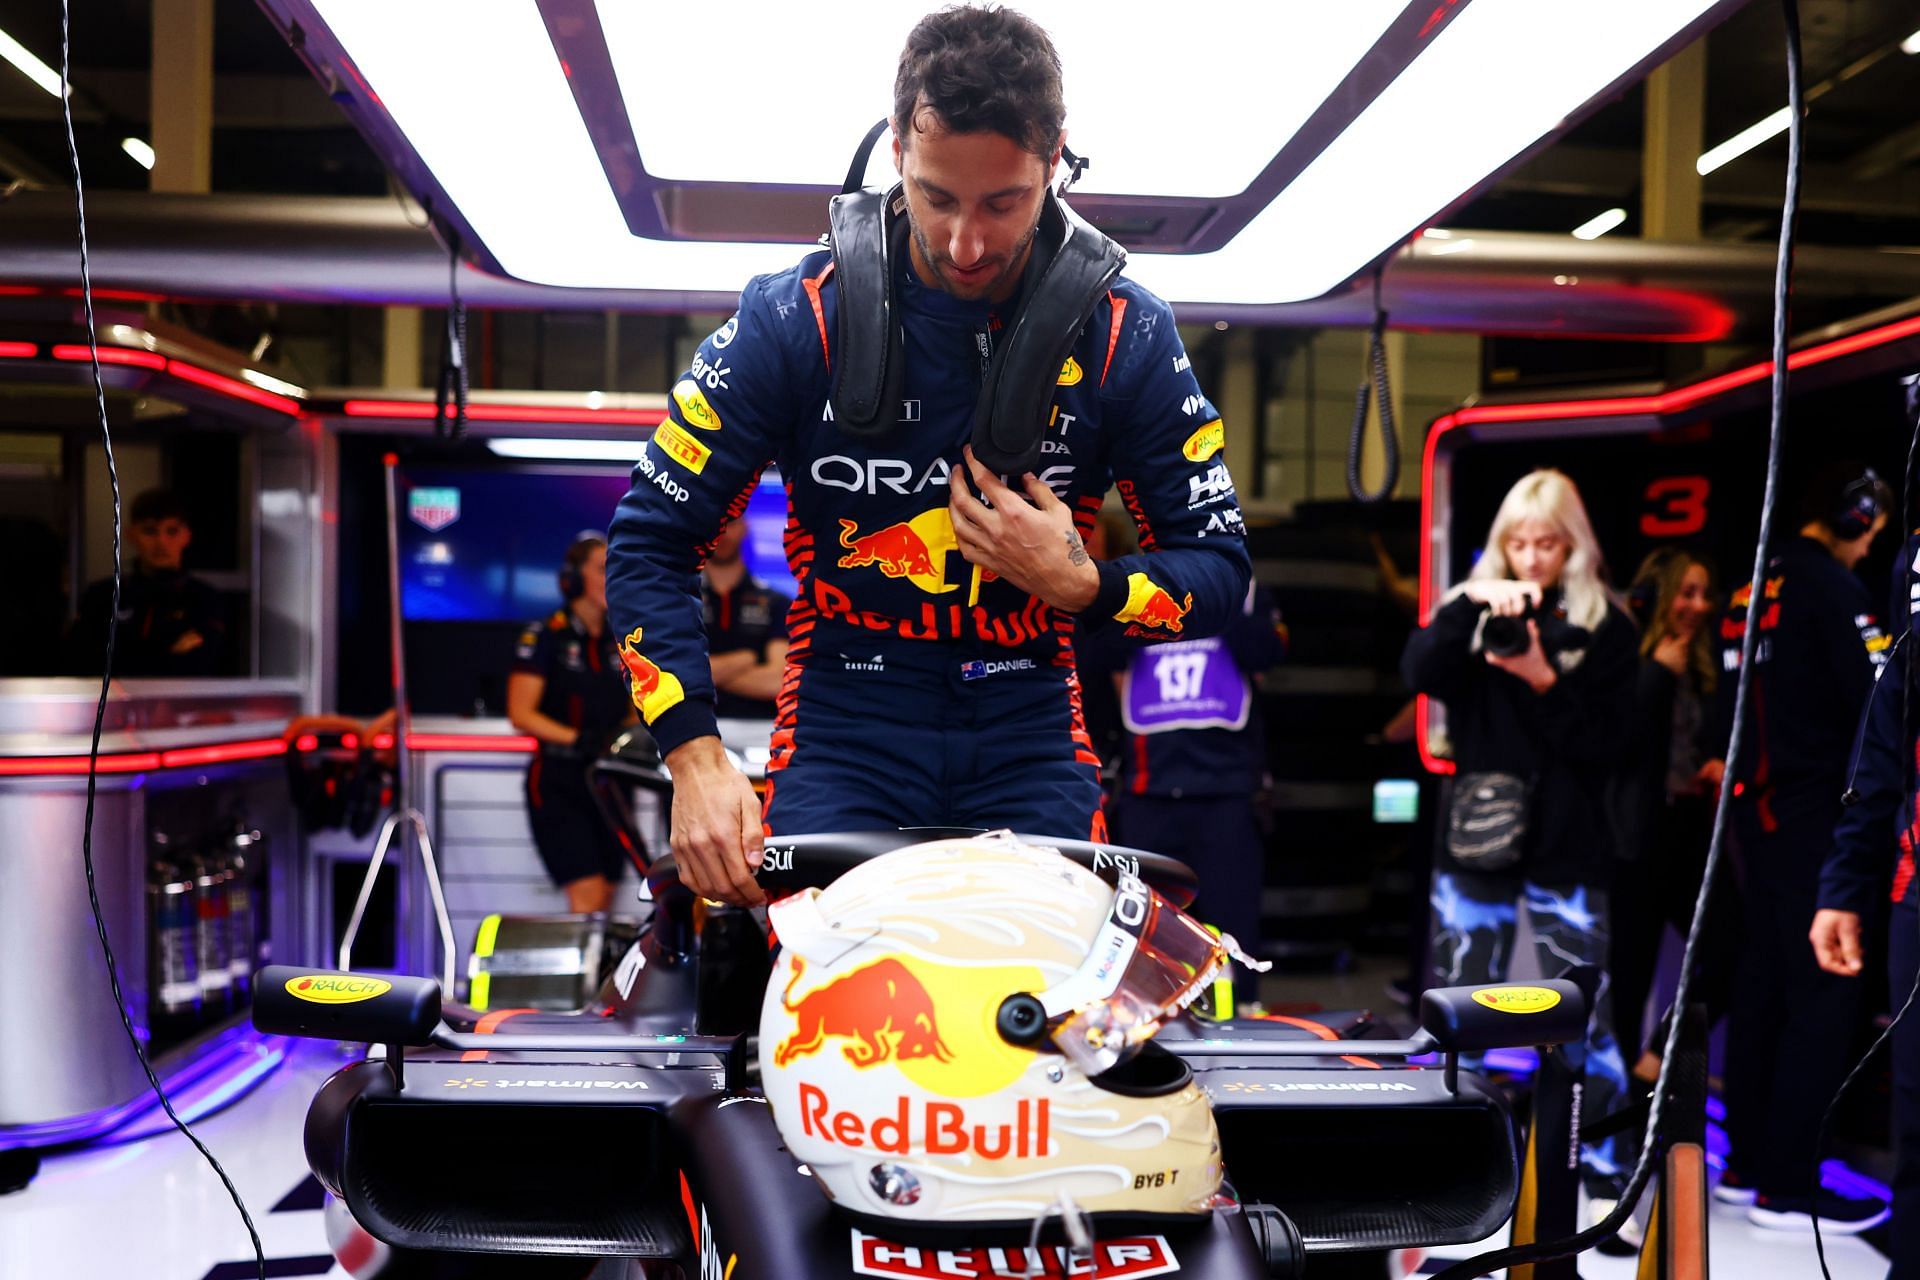 Daniel Ricciardo preparing for the Red Bull test at Silverstone, 11th July 2023 (Photo by Mark Thompson/Getty Images)